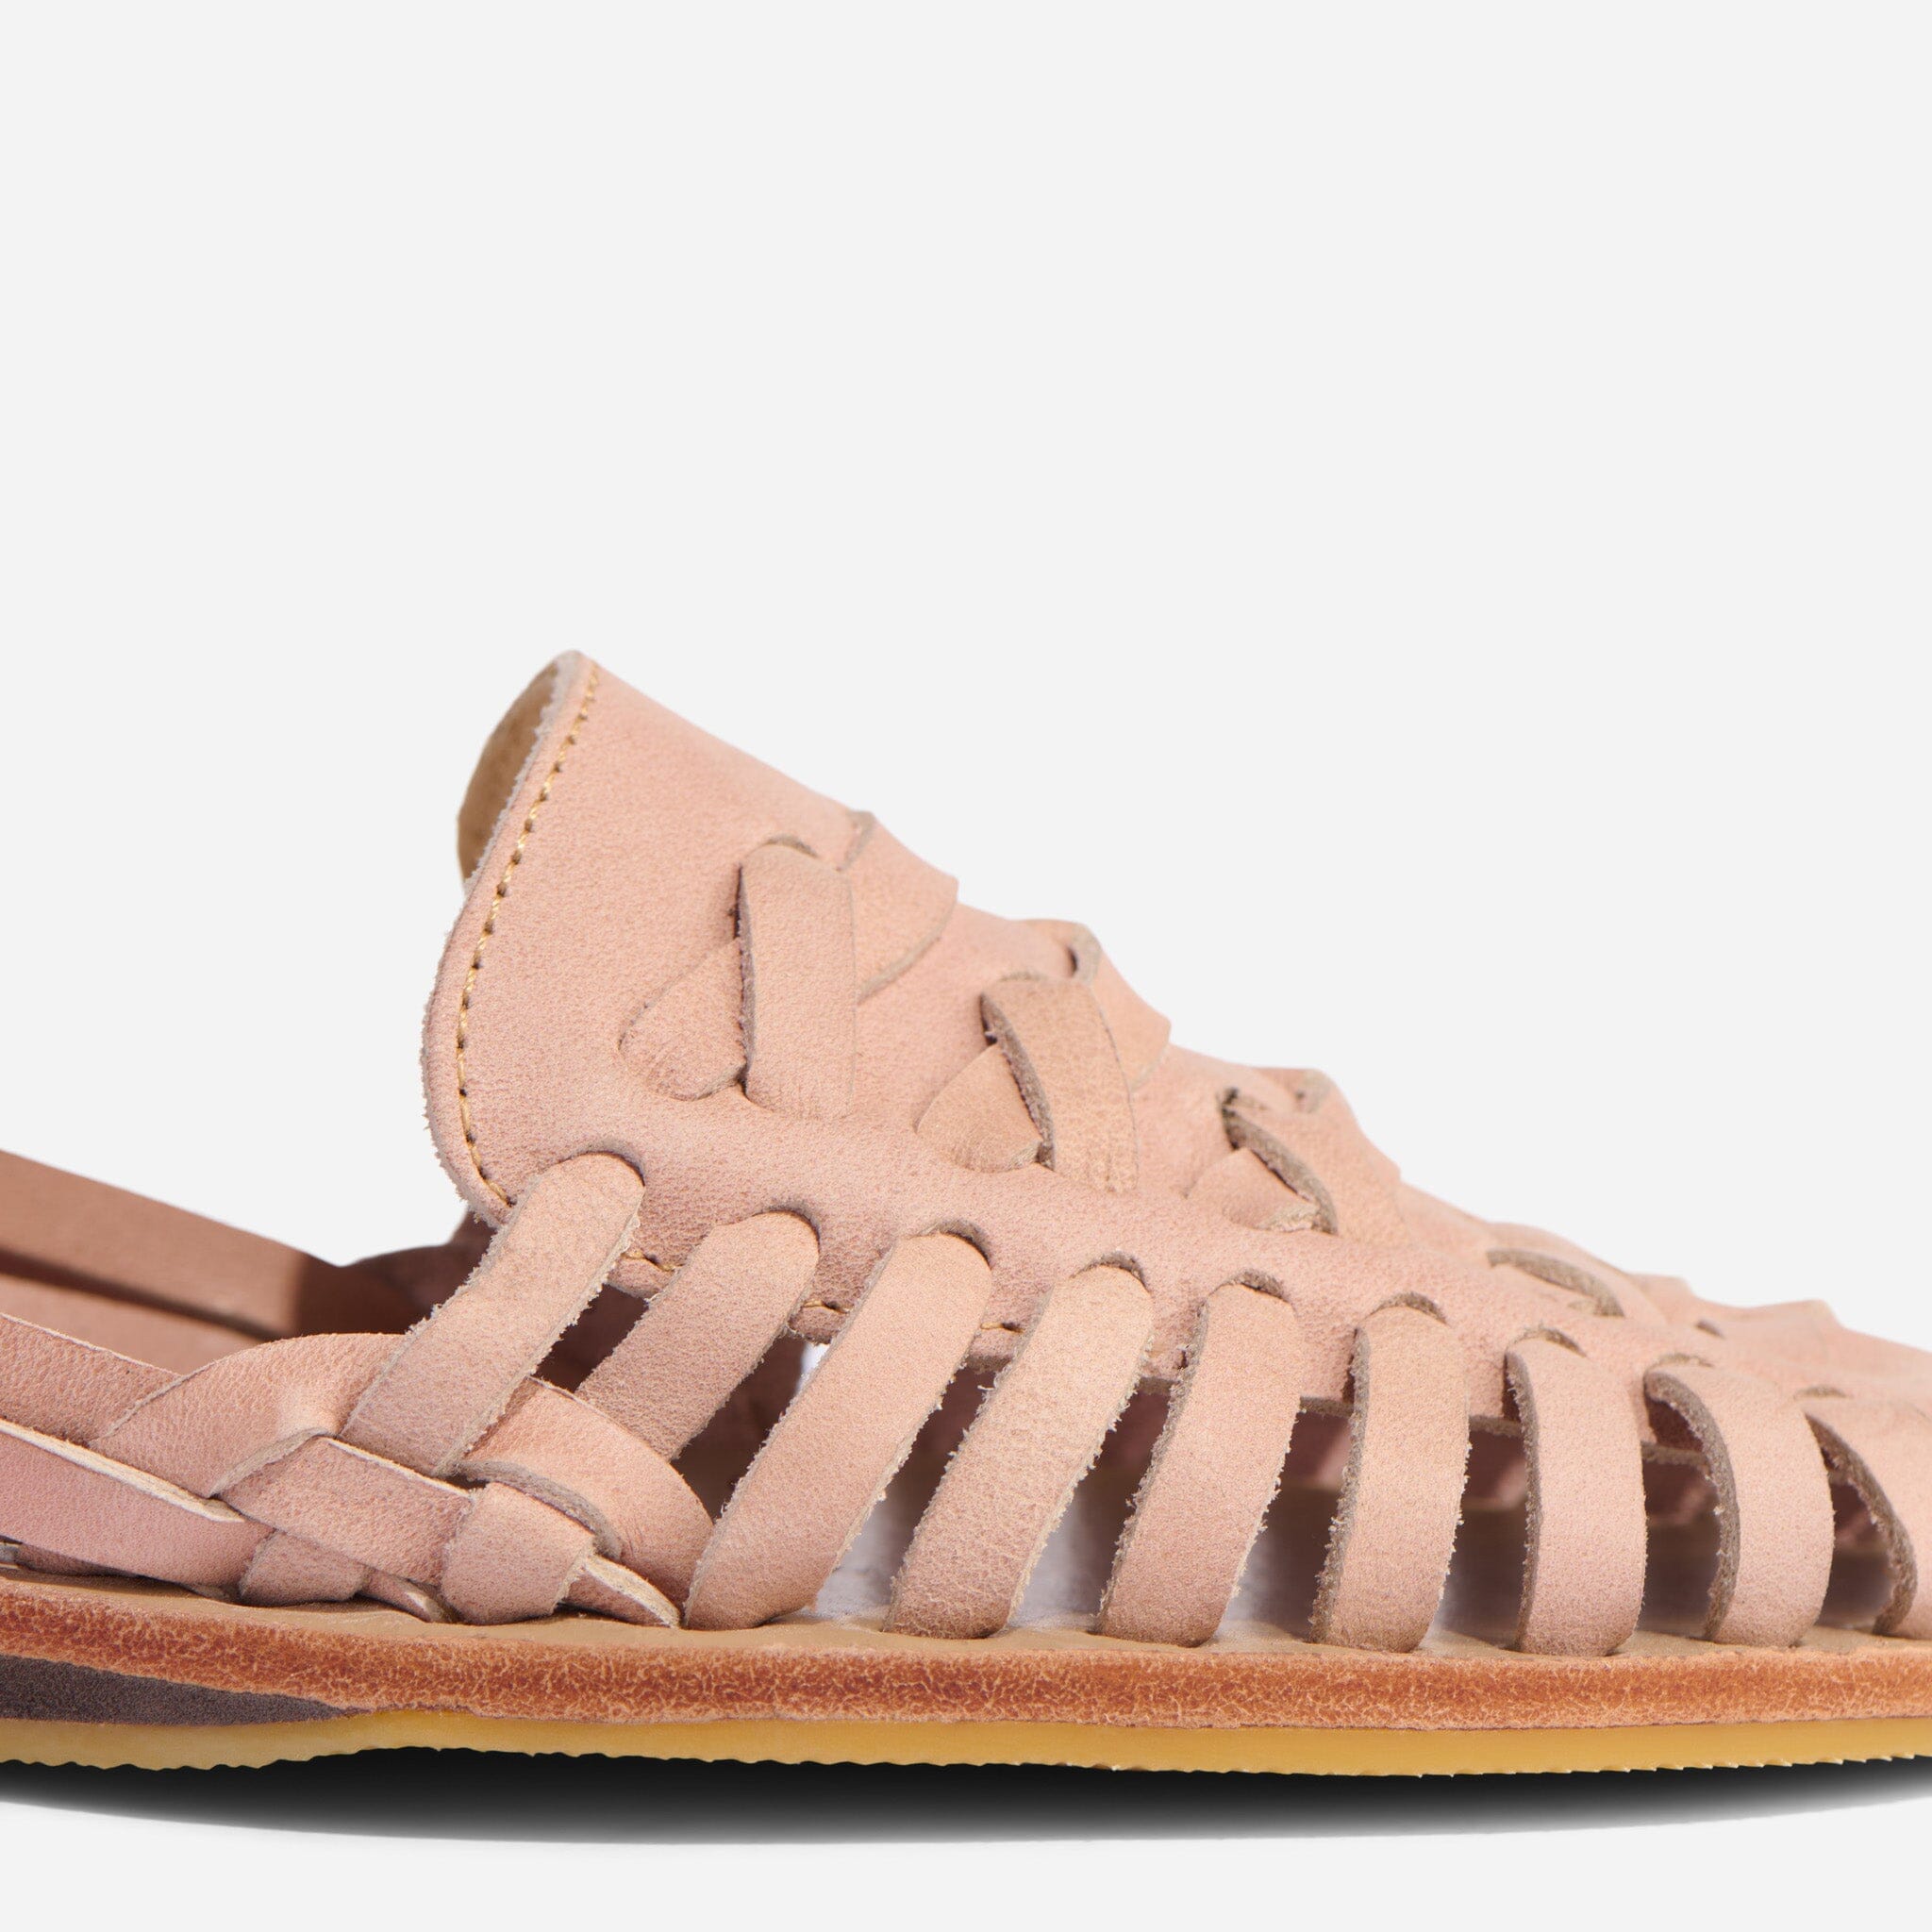 What Is Mushroom Leather? Why This Alt Leather Has Adidas' Attention